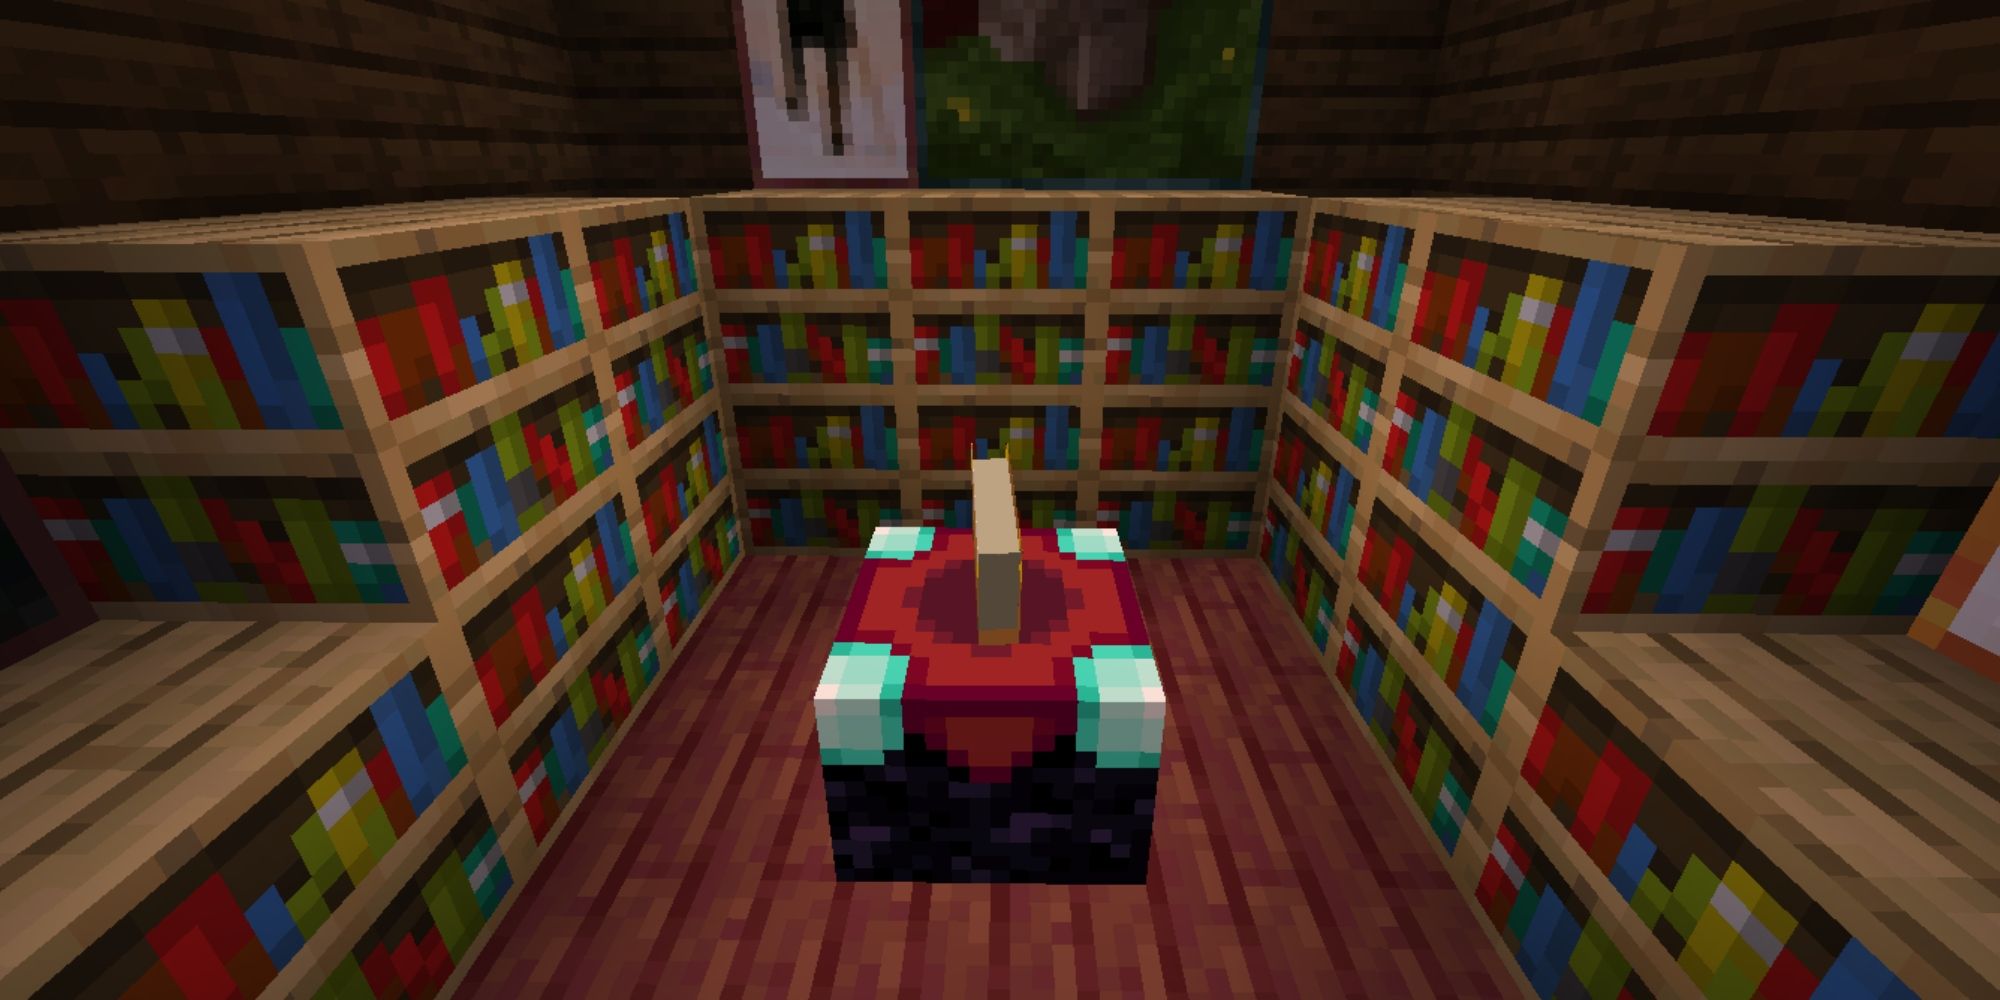 Minecraft Enchanting Table in a small room surrounded by bookshelves